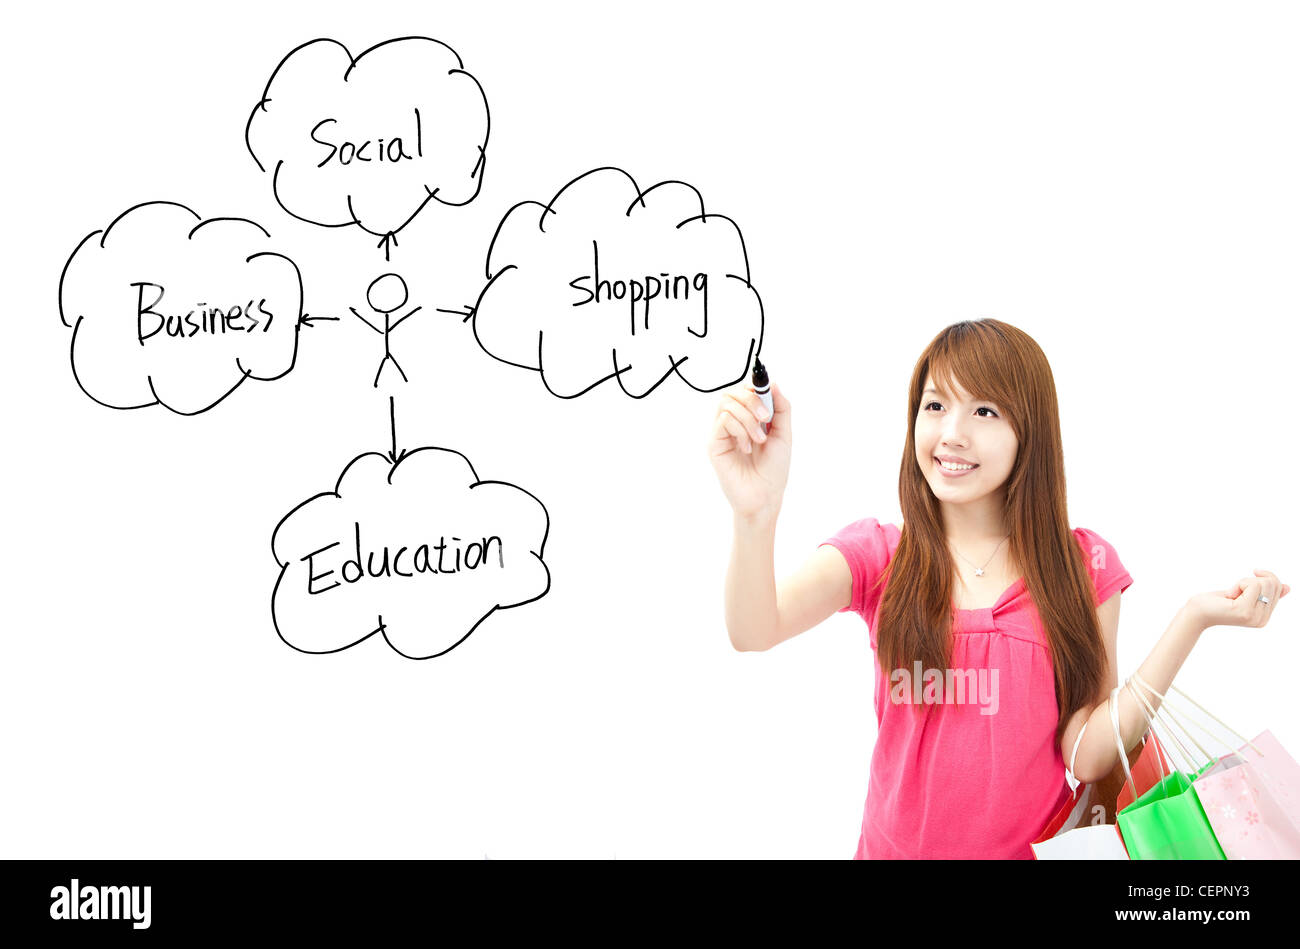 smiling girl drawing internet service cloud map Stock Photo